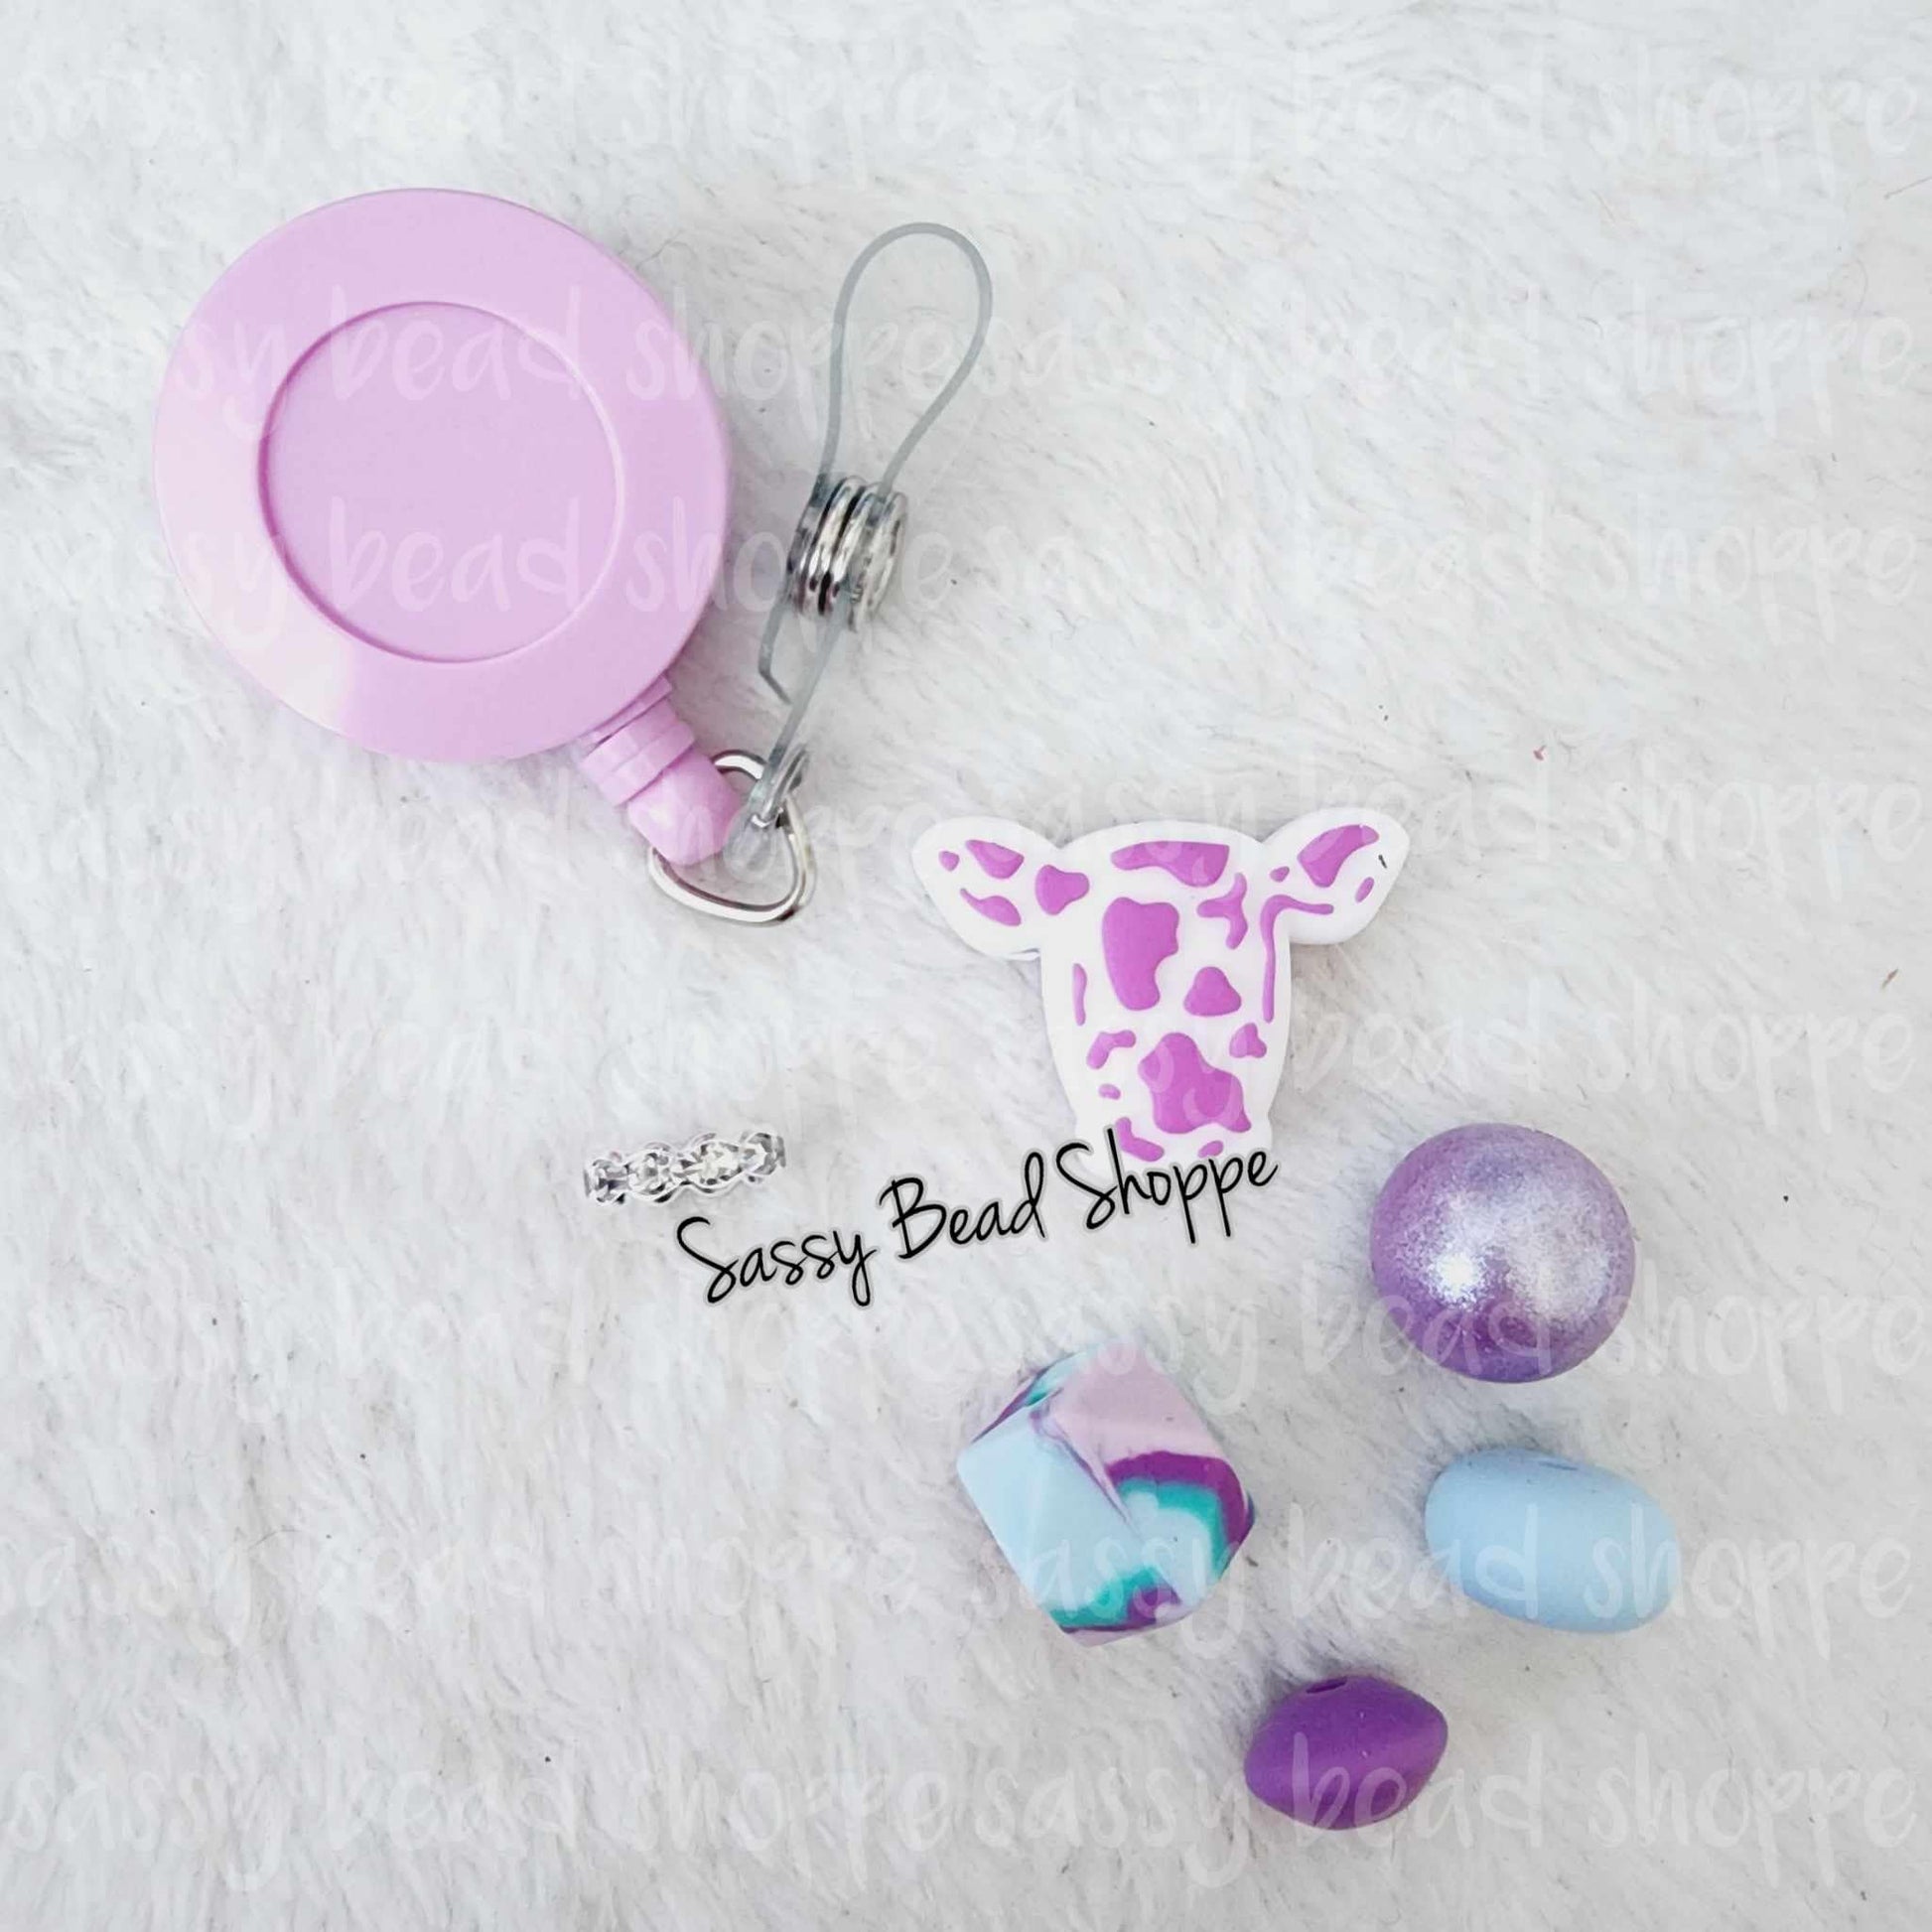 Sassy Bead Shoppe Unforgetable Badge Reel What you will receive in your kit